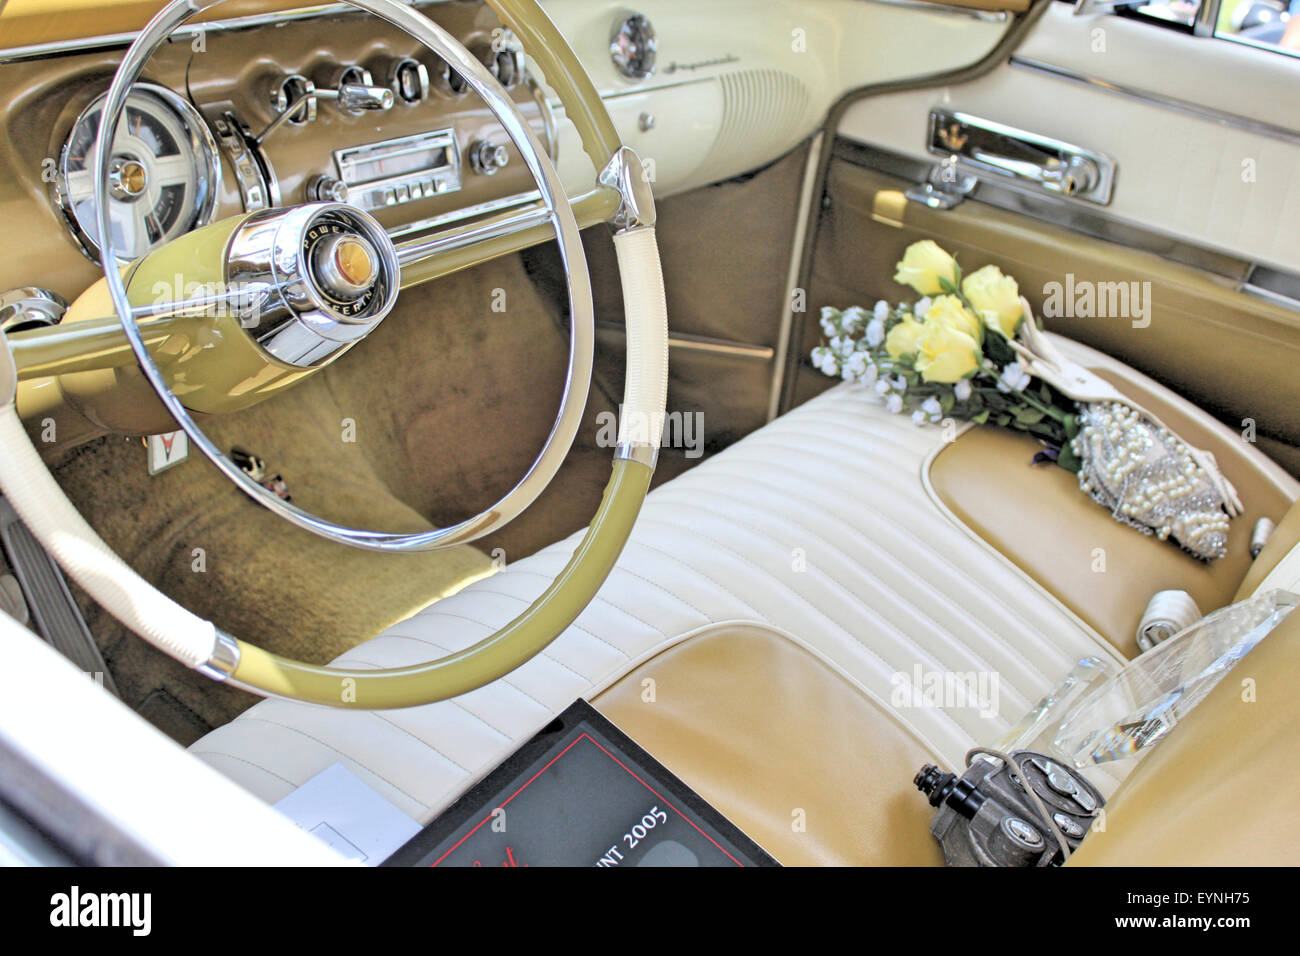 A Beautifully Decorated Antique Car Interior Stock Photo